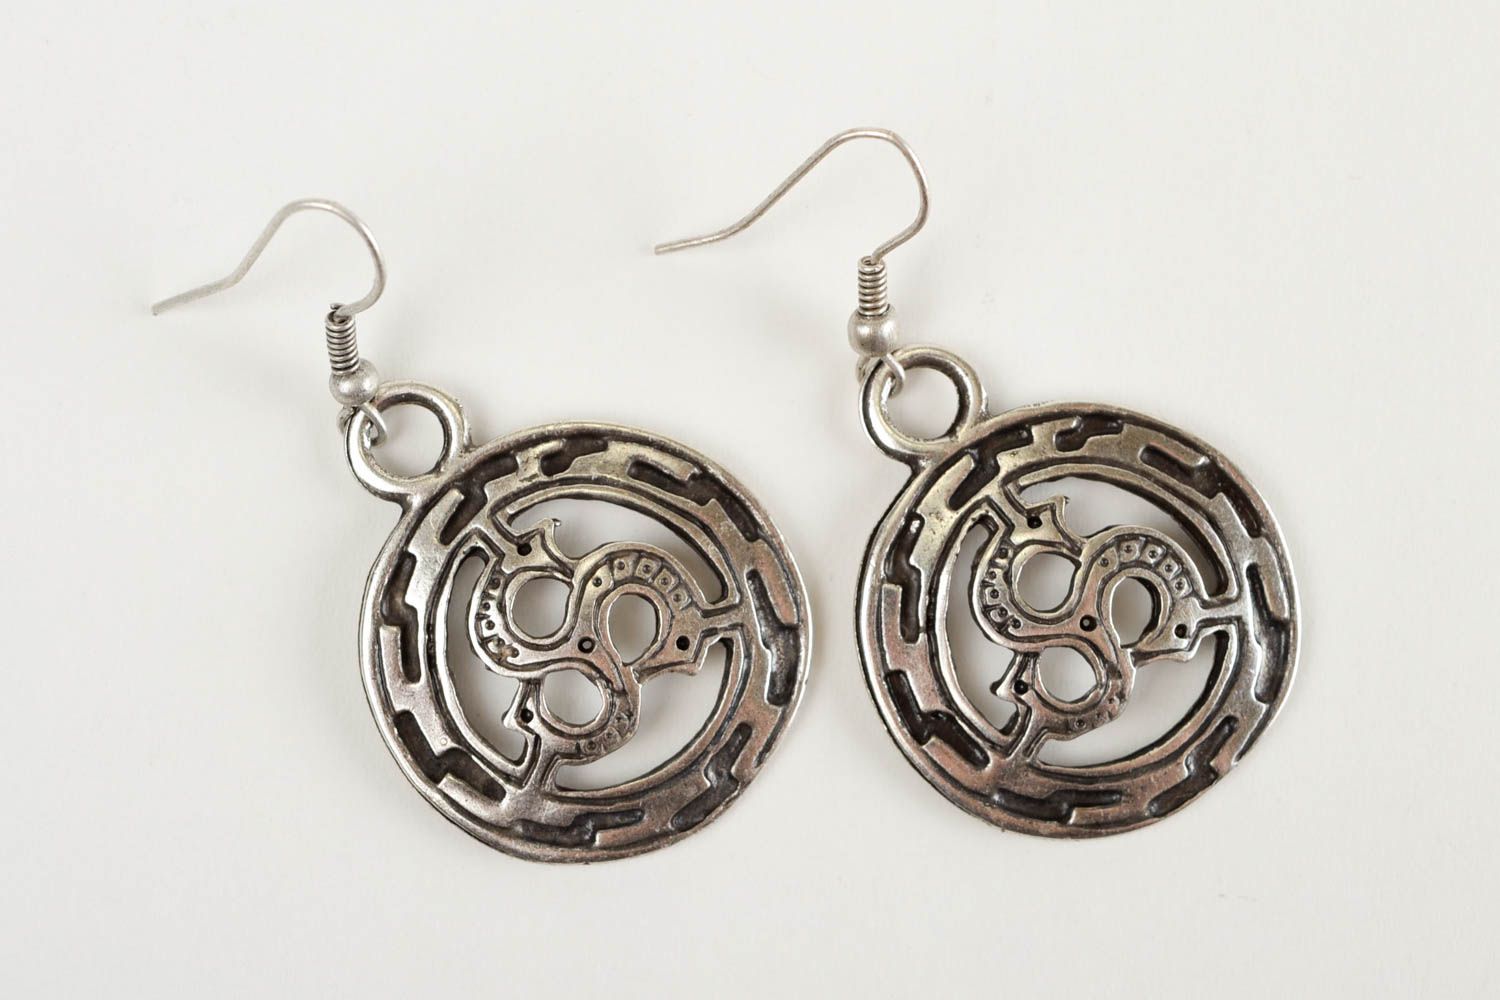 Hand crafted metal earrings women fashion accessories gift ideas round earrings photo 3